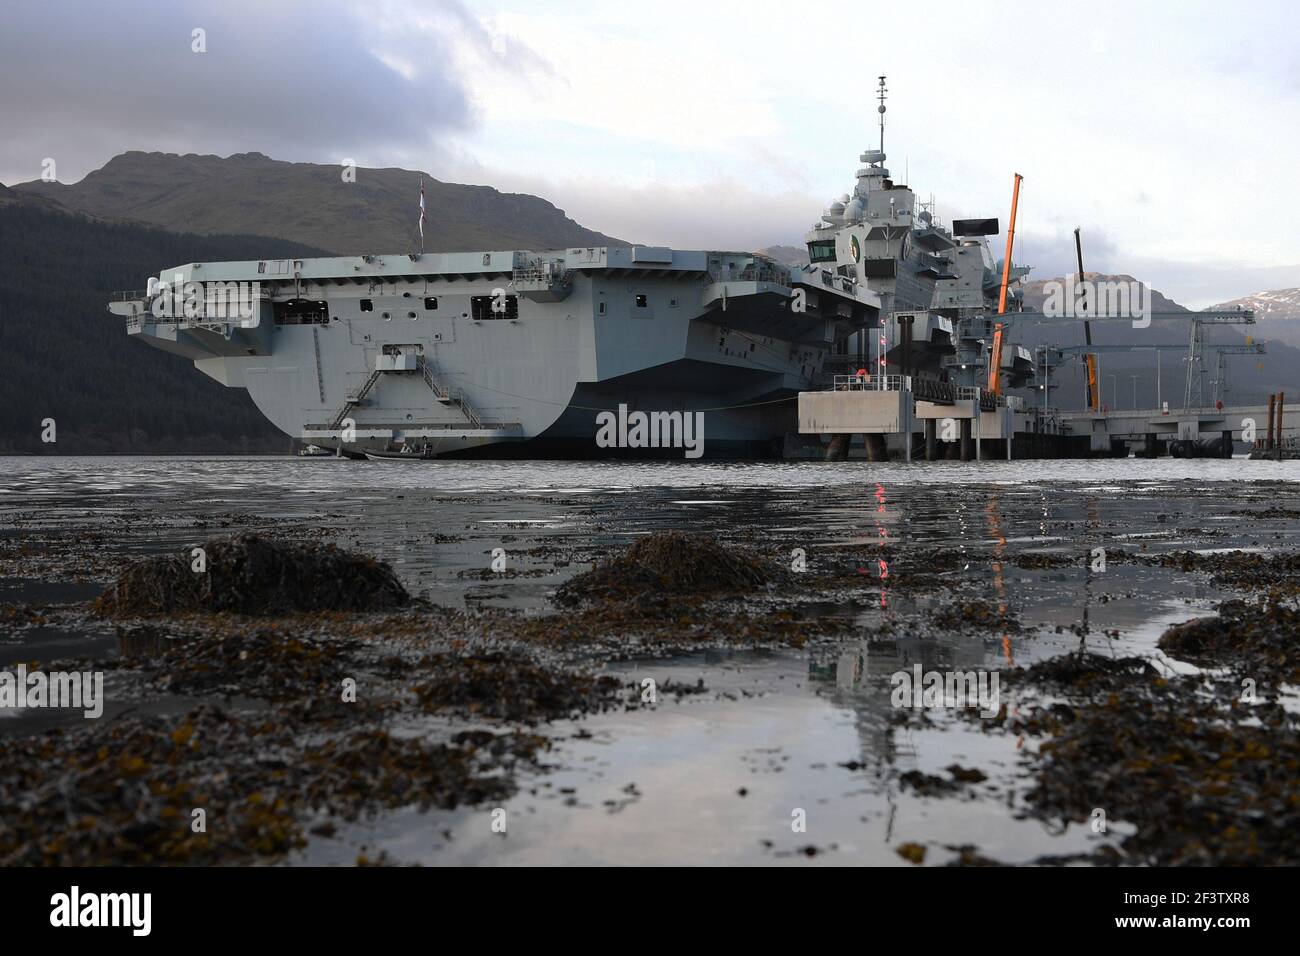 Finnart, Loch Long, Scotland, UK. 17 March 2021.  PICTURED: HMS Queen Elizabeth is the largest and most advanced warships ever built for the Royal Navy. Both HMS Queen Elizabeth (pictured) and HMS Prince of Wales are the nation's flagships which weigh in a 65,000 tonnes and measure 280 meters in length. The Aircraft Carrier is currently berthed on the side of Long Loch at Glen Mallan taking on fuel, munitions  and other supplies, ahead of naval exercises which are part of the UK Carrier Strike Group 2021. The ship is due to leave on Sunday. Credit: Colin Fisher/Alamy Live News. Stock Photo